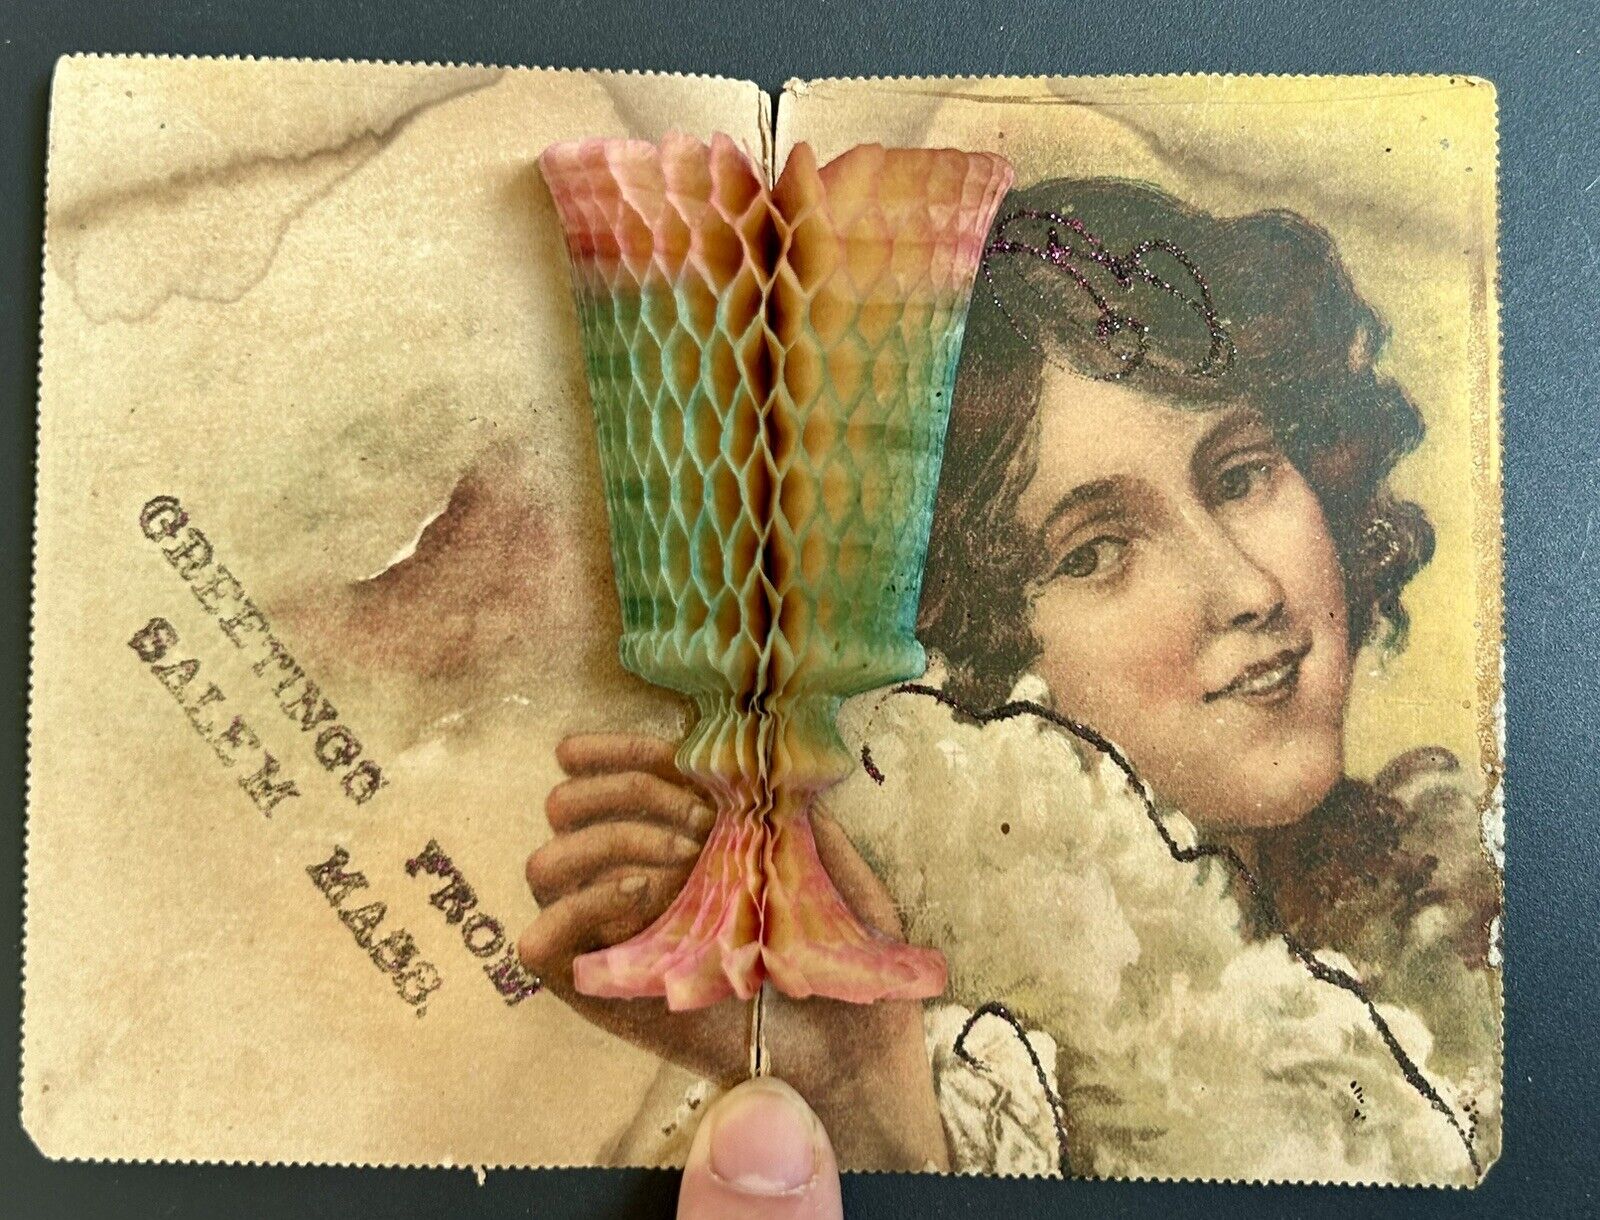 Vintage letter card. Woman with wine glass. Early 1900s greeting card. Salem MA